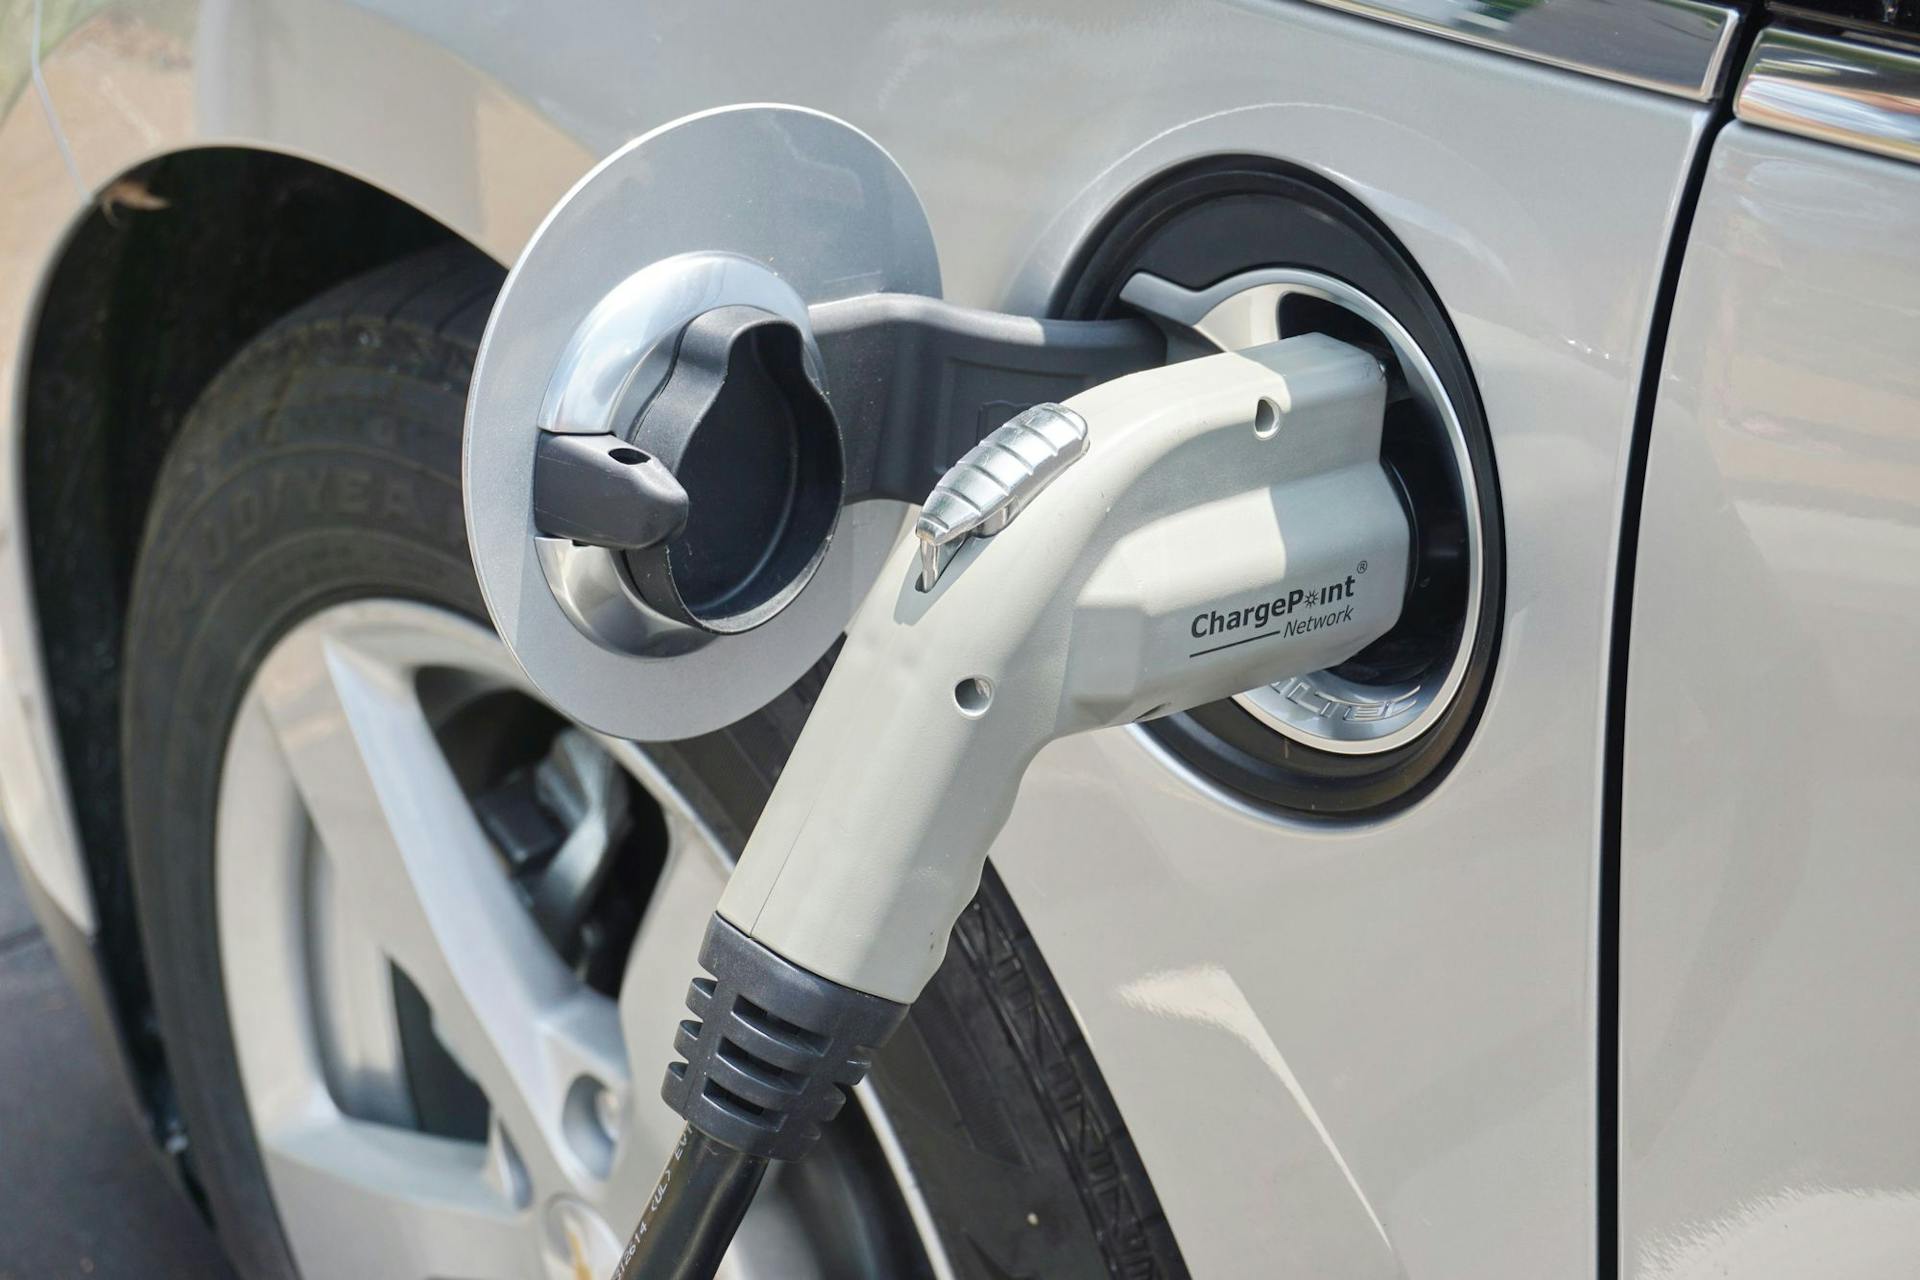 Chargepoint EV charger charging a white electric vehicle